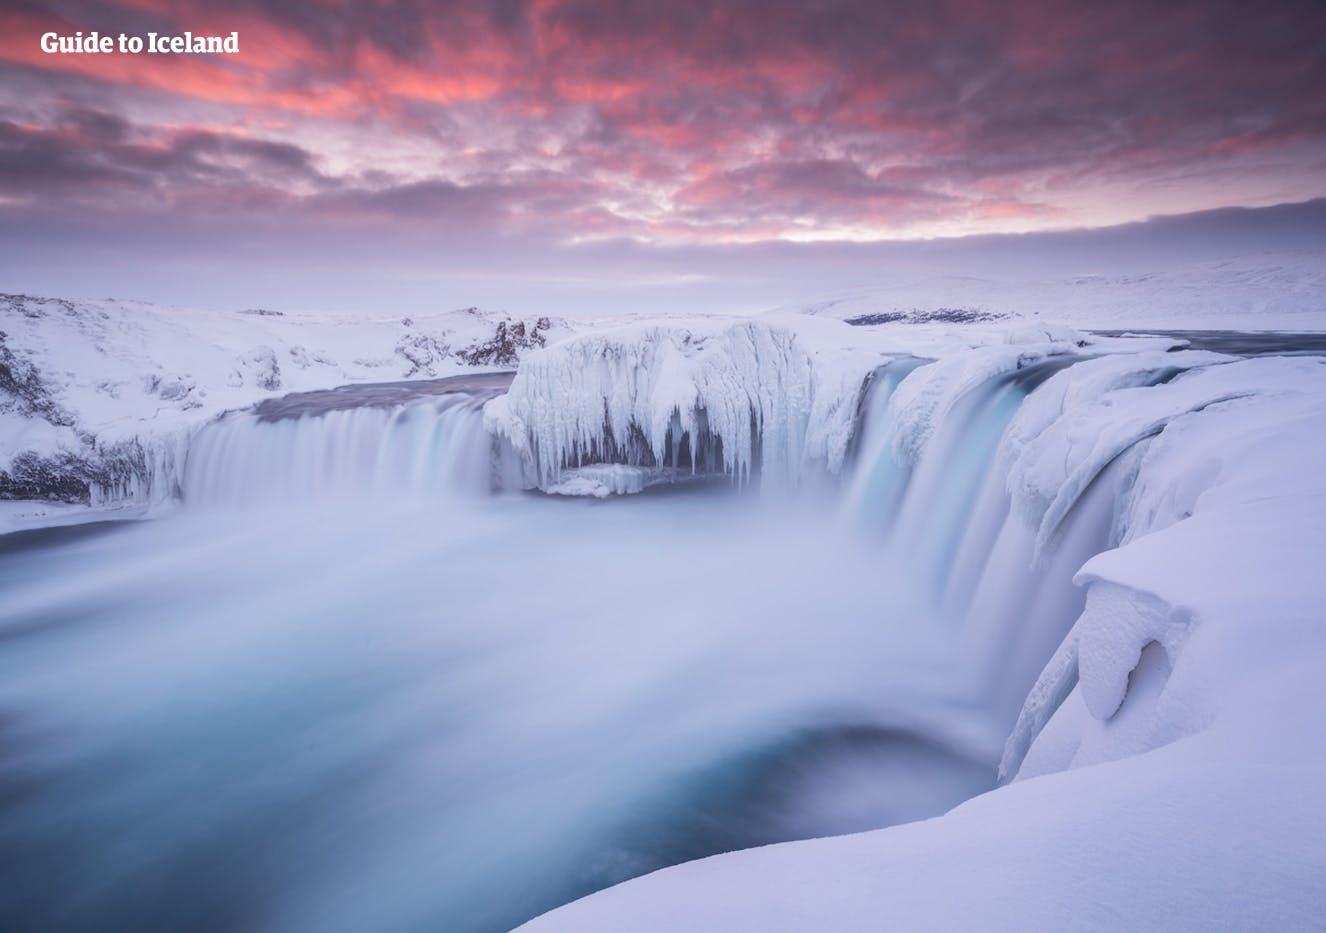 Goðafoss waterfall is mysterious looking in its icy coating.